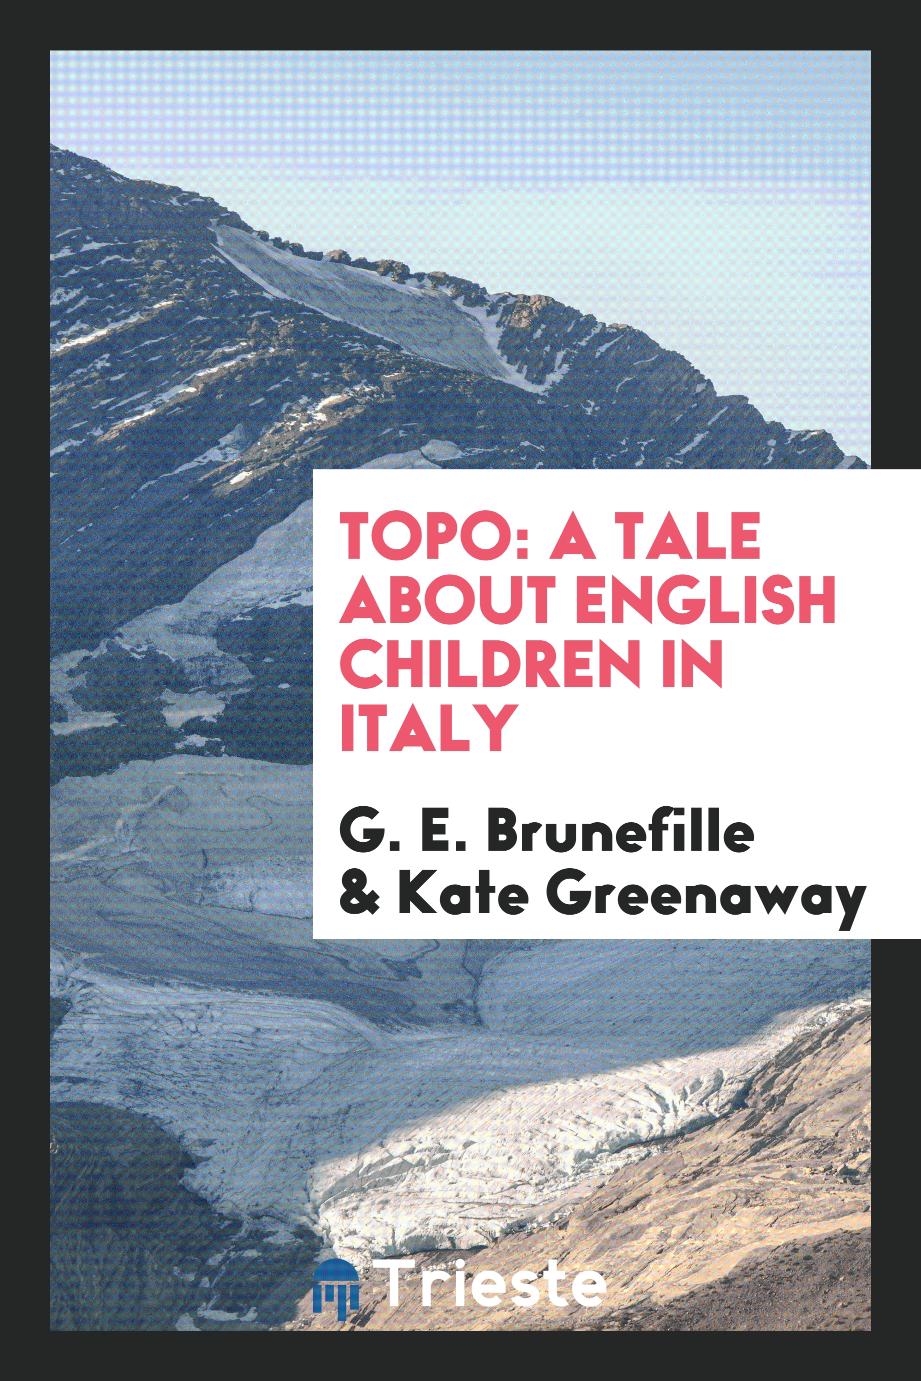 Topo: A Tale About English Children in Italy